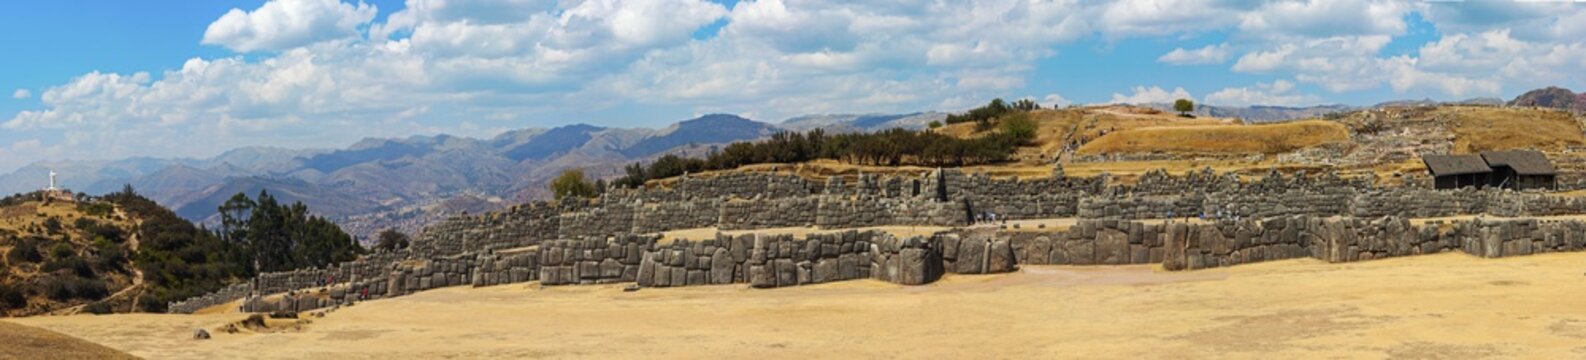 View of Sacsahuaman with a part of the stone wall at Cusco in Peru